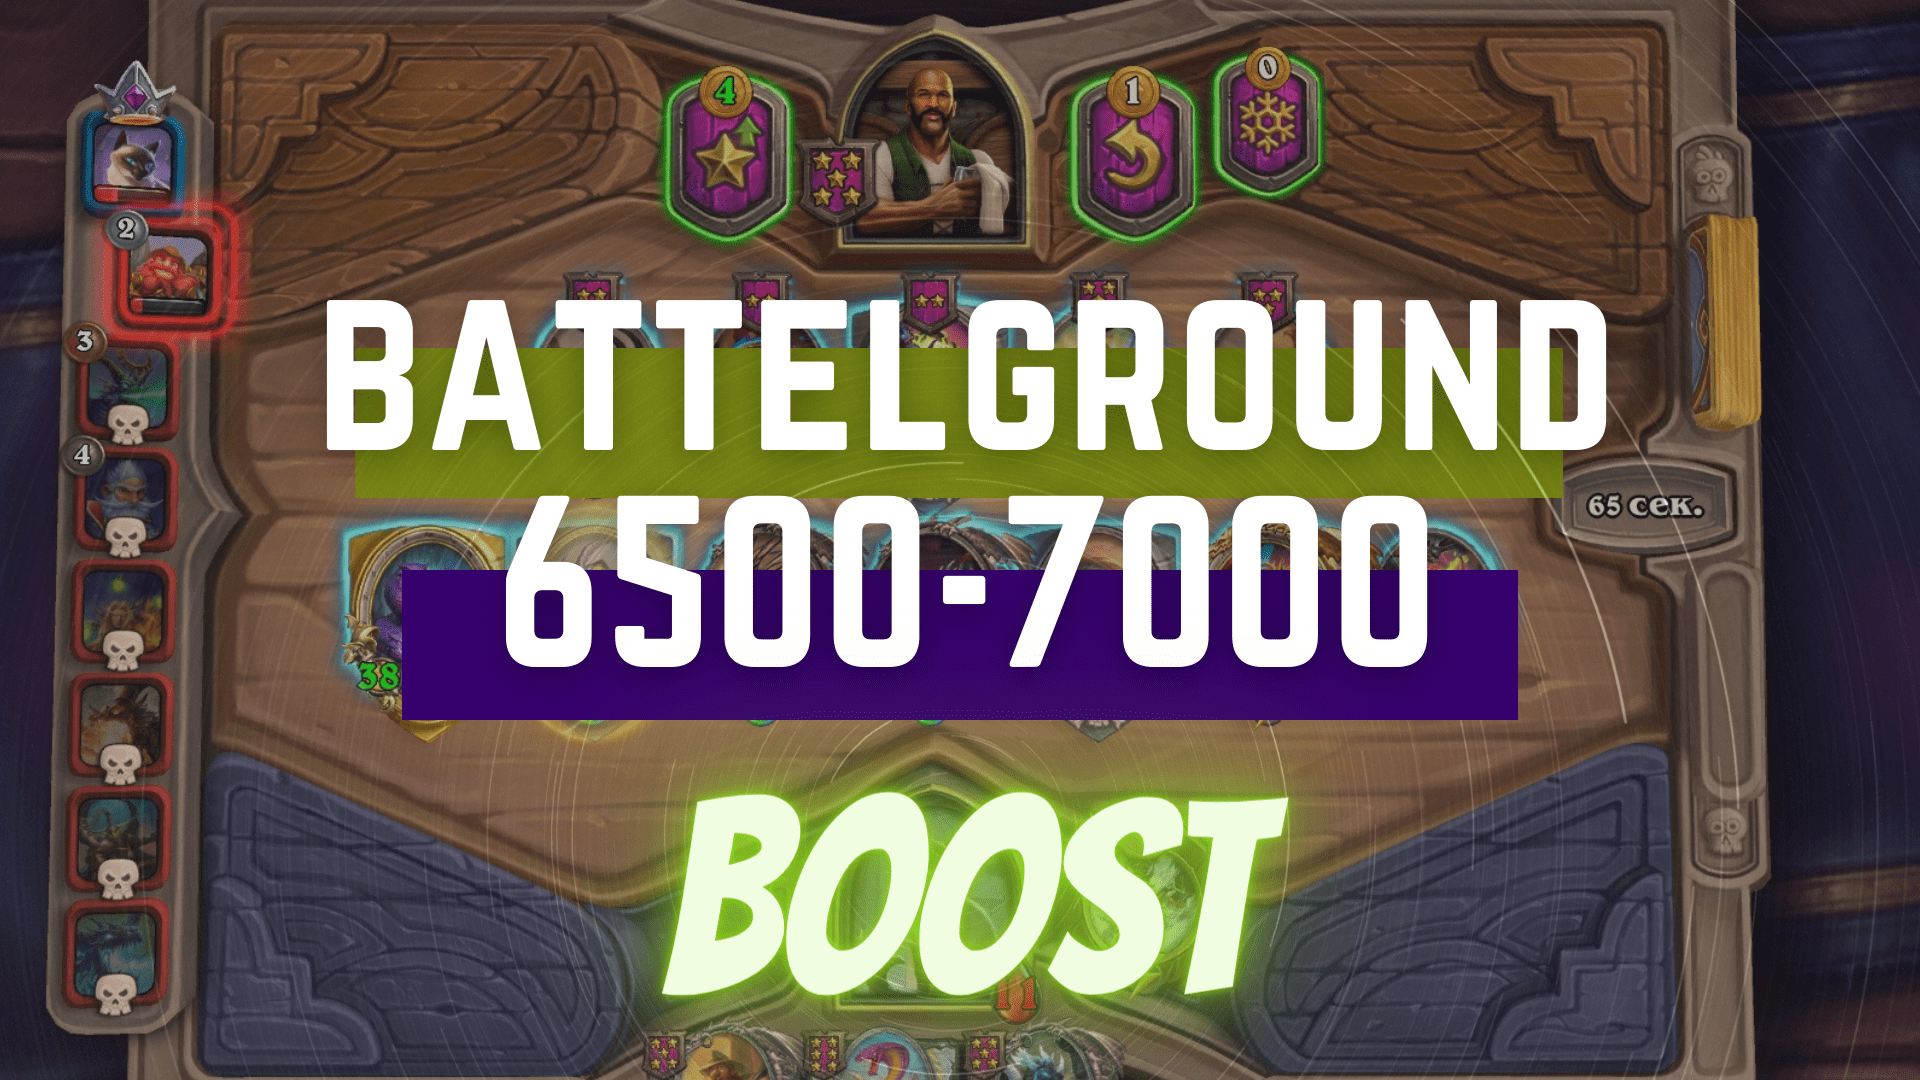 [BATTLEGROUNDS RATING] BOOST FROM 6500 TO 7000 GBD - e2p.com